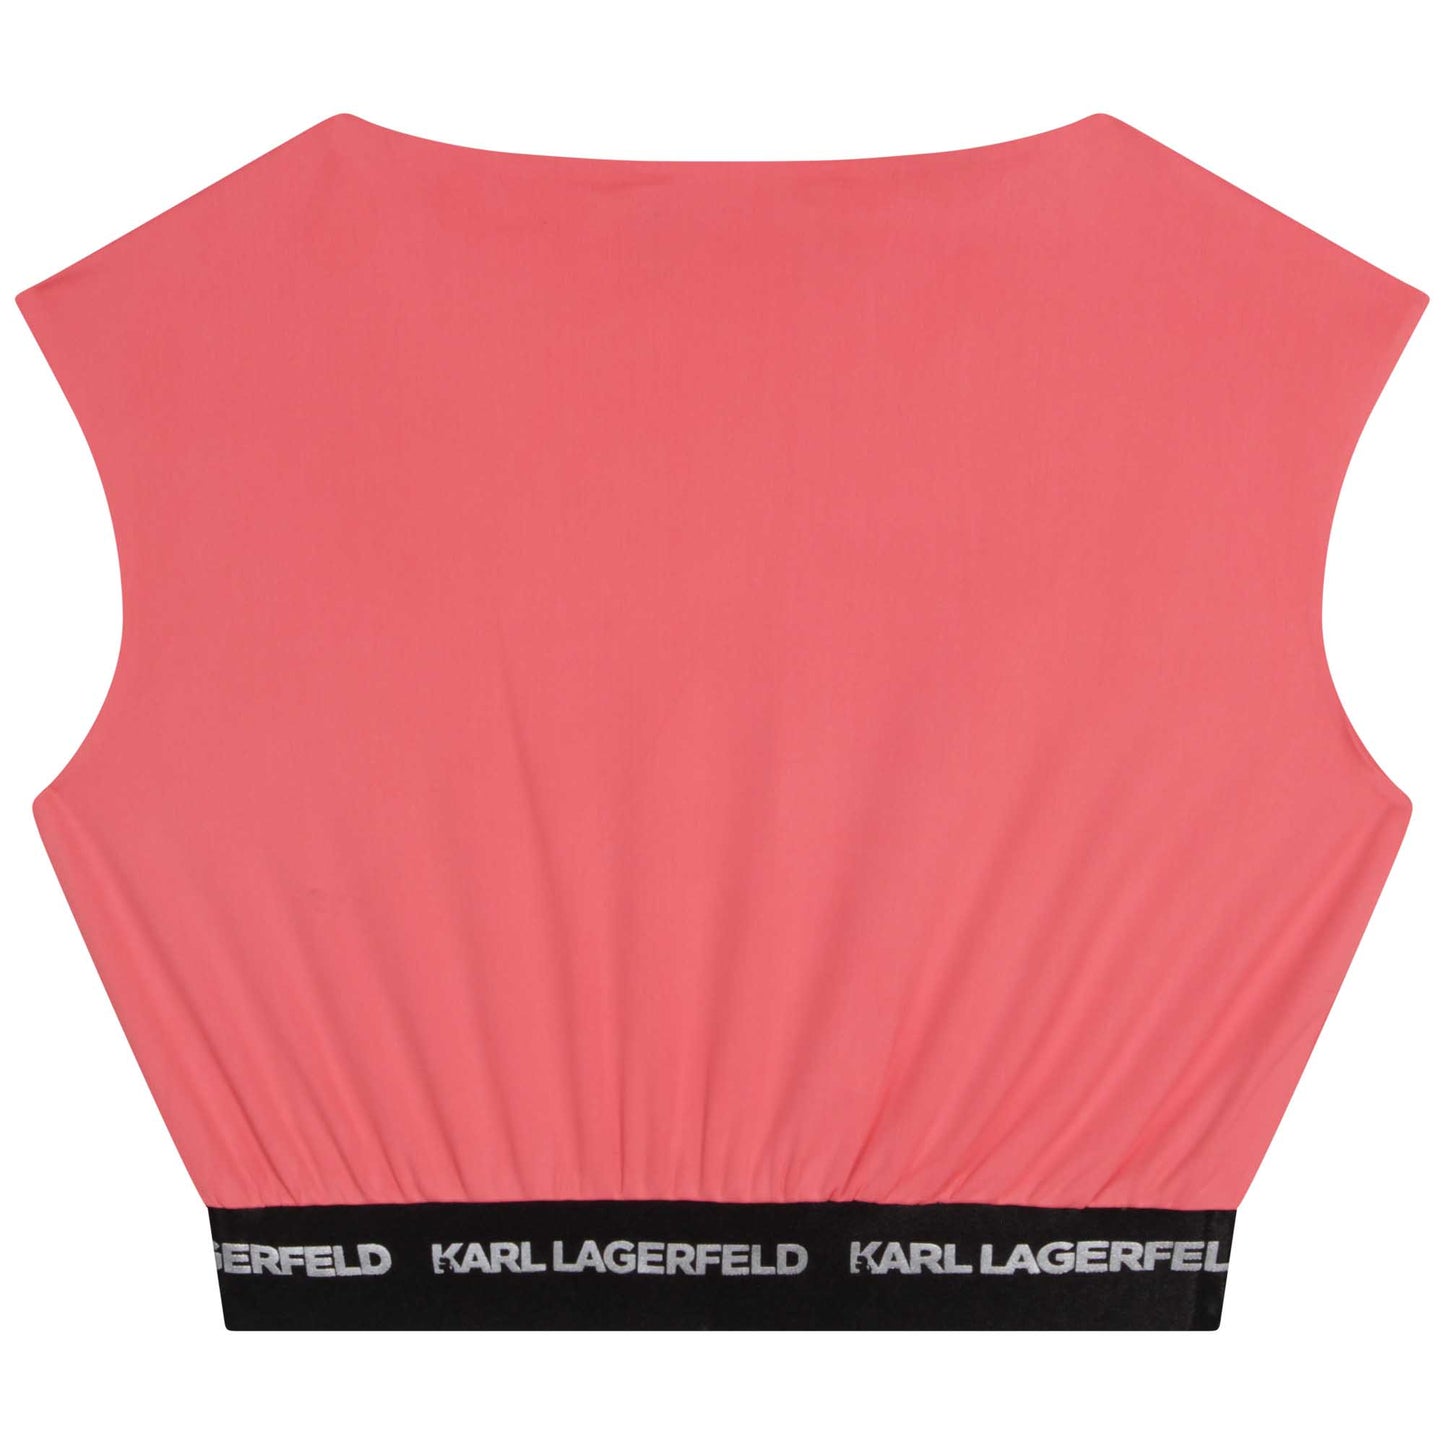 Karl Lagerfeld Girls Cropped Sports Top & Legging Outfit Set